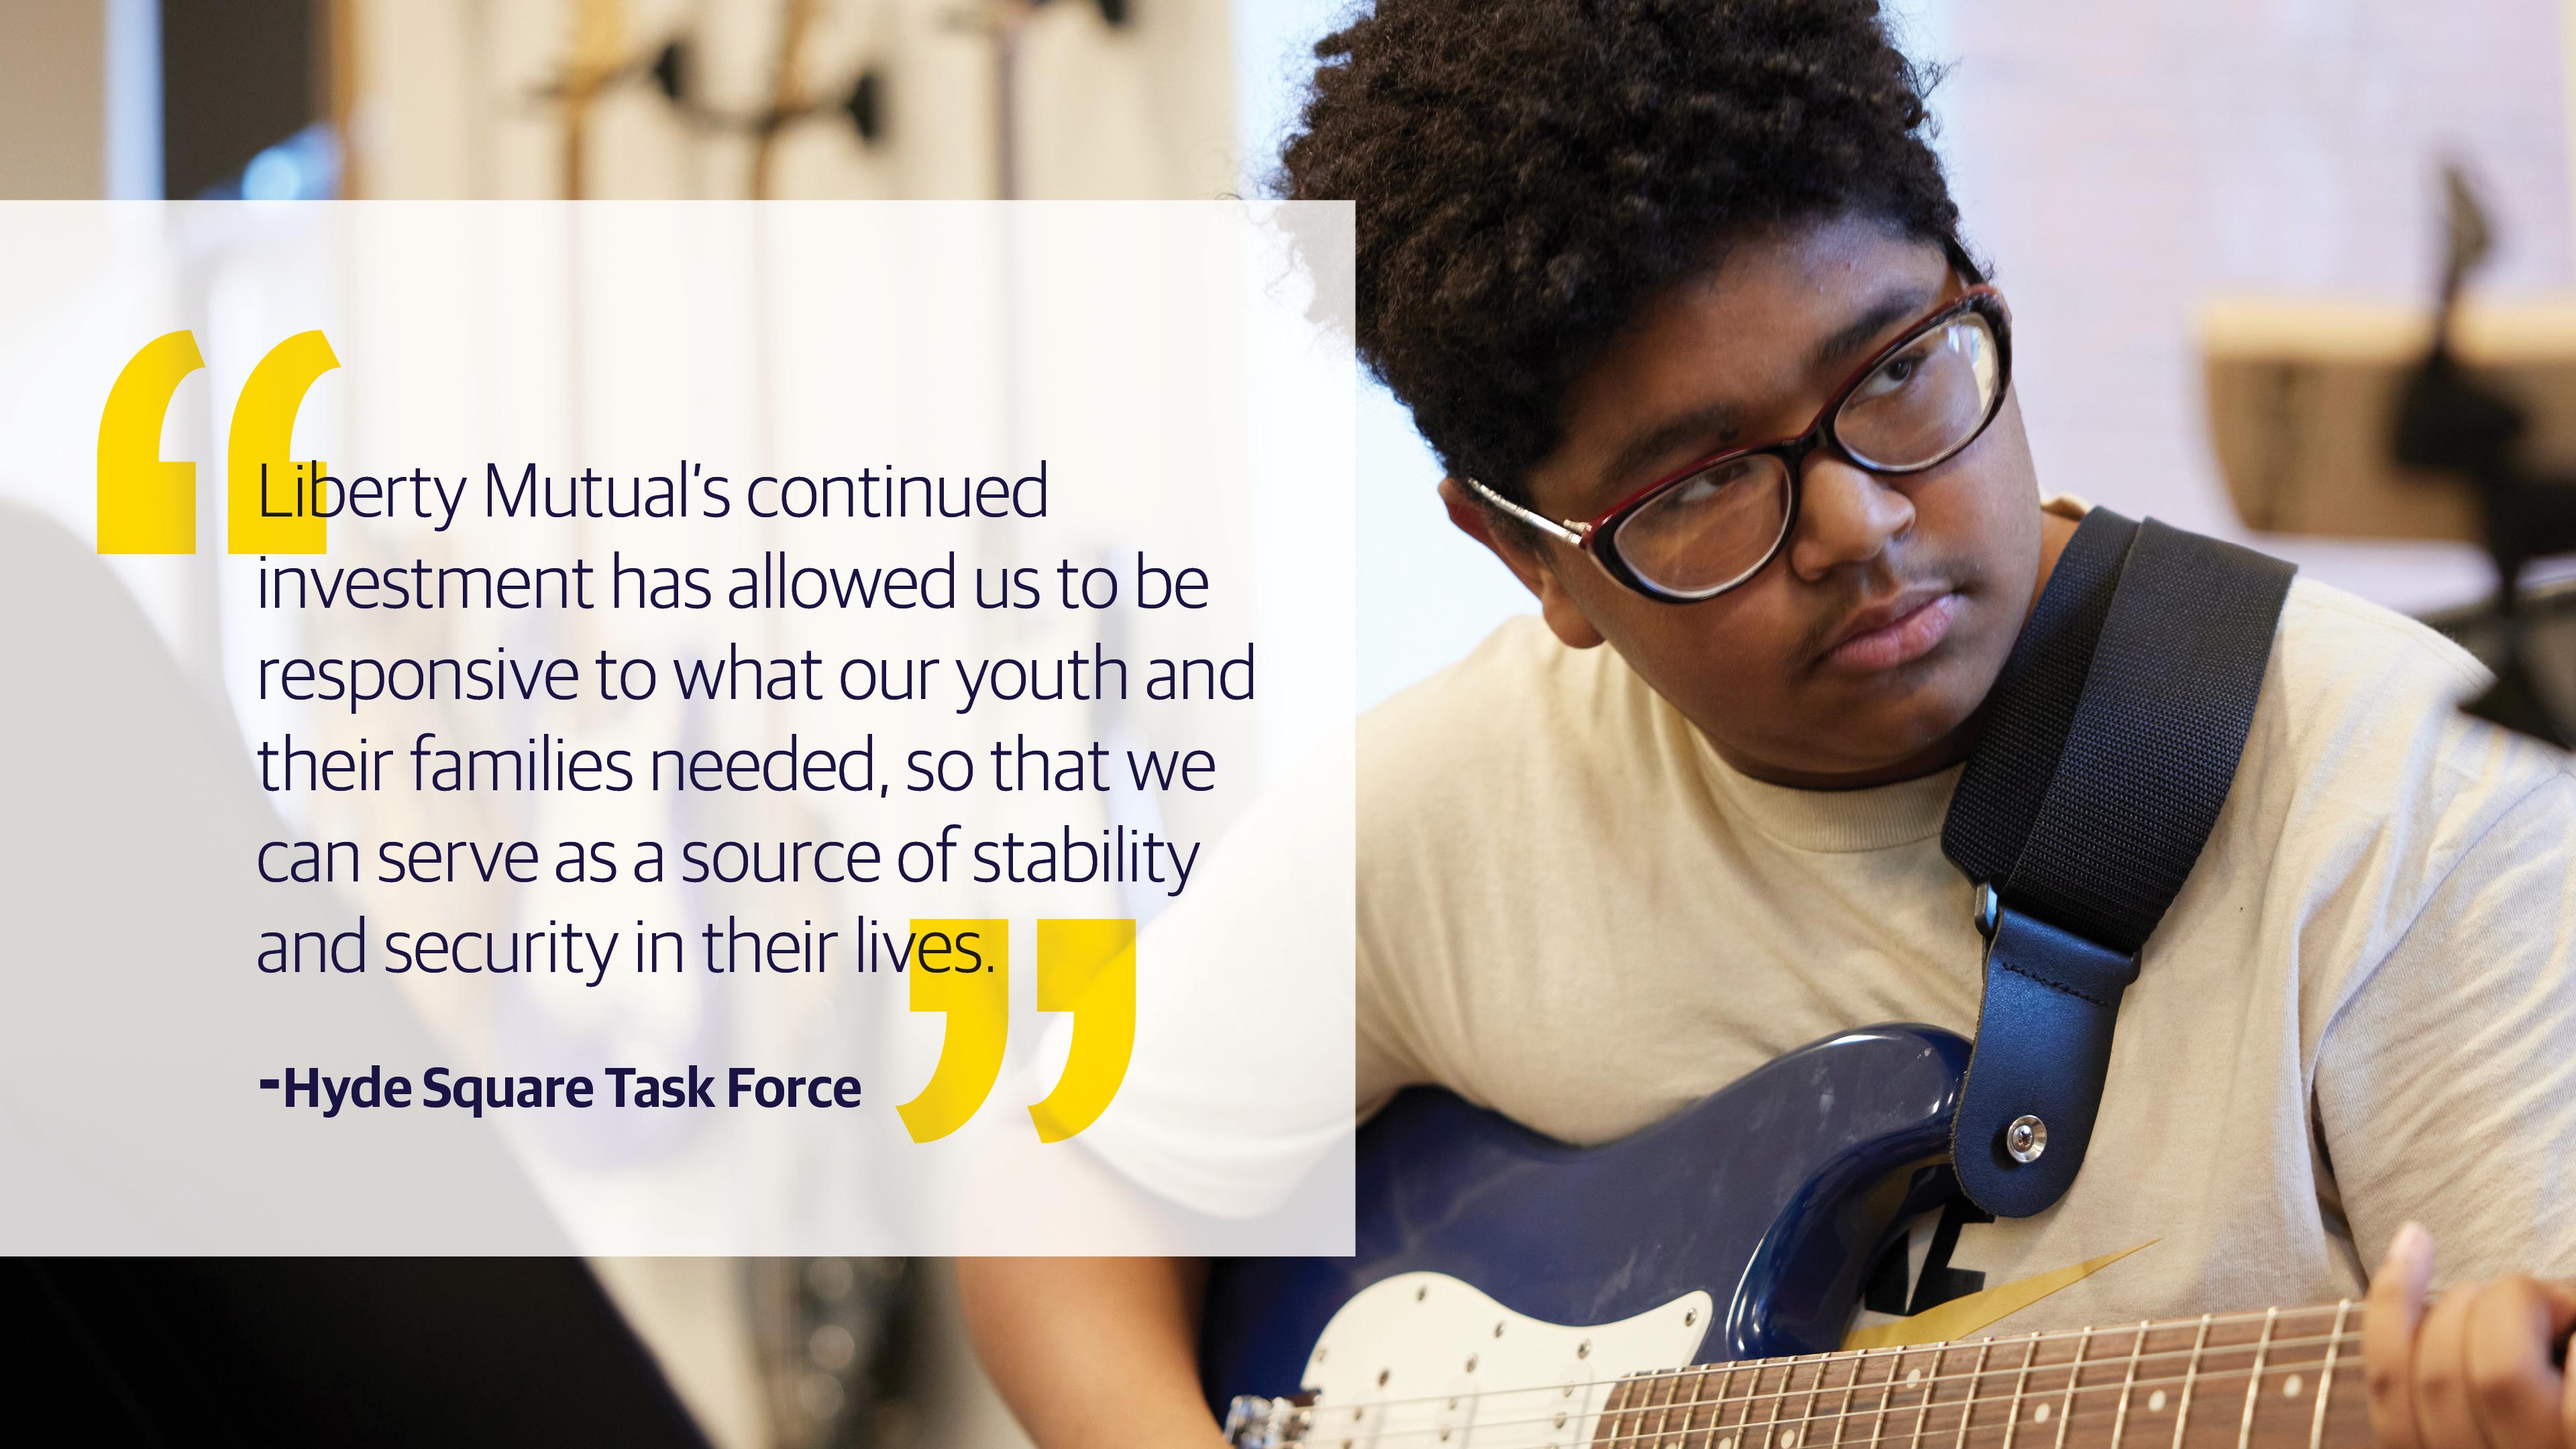 (slide 4 of 4) "Liberty Mutual's continued investment has allowed us to be responsive to what our youth and their families needed, so that we can serve as a source of stability and security in their lives." - Hyde Square Task Force. 